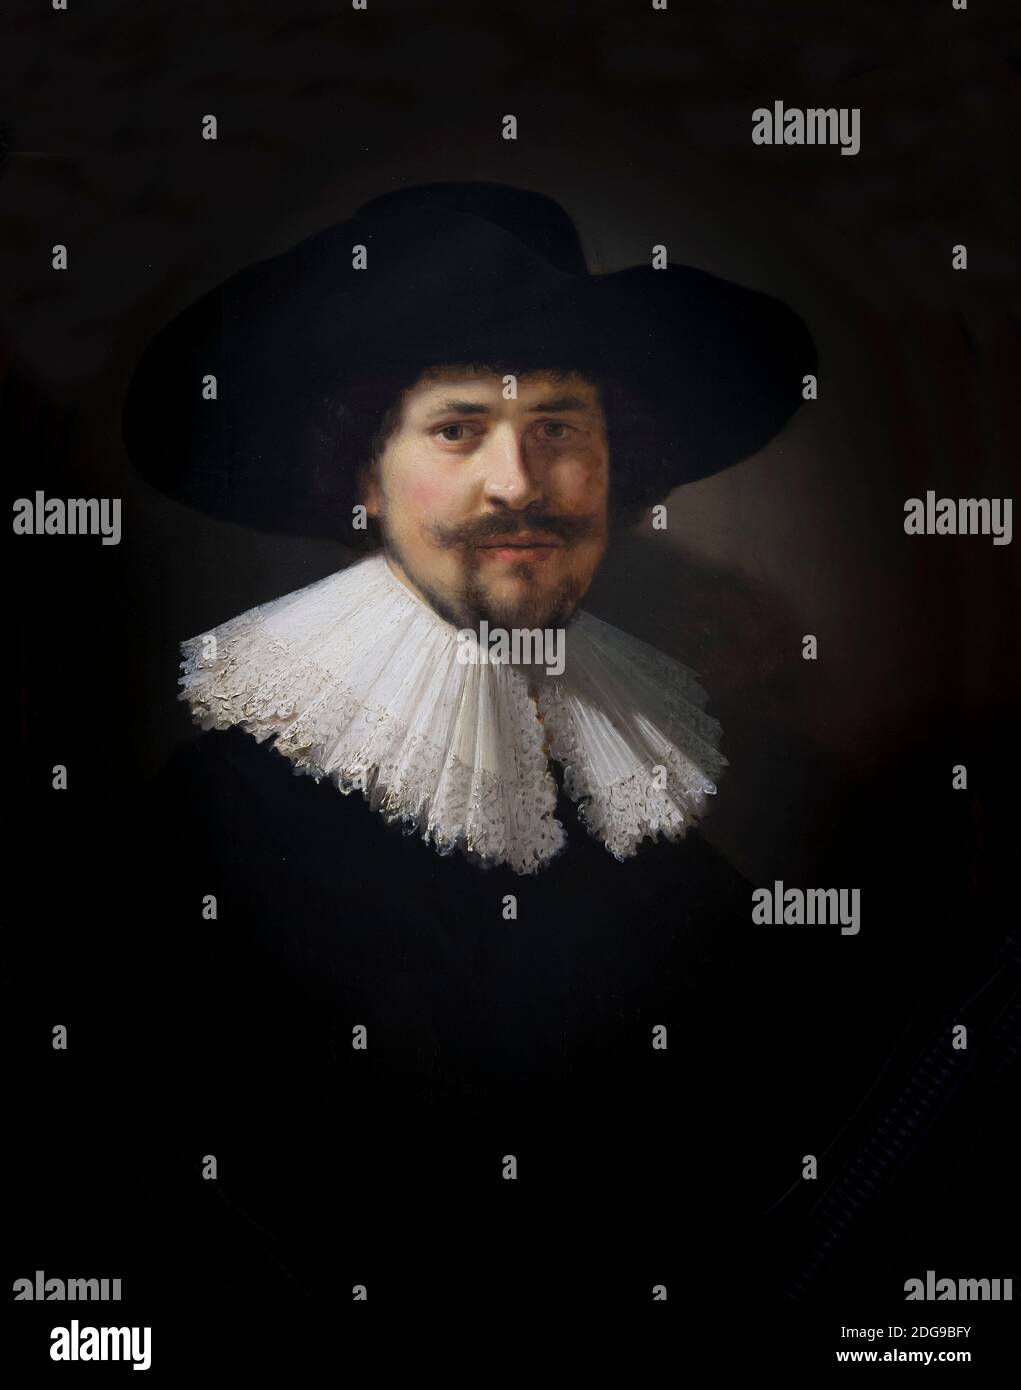 Portrait of a Man Wearing a Black Hat, Rembrandt, 1634, Museum of Fine Arts, Boston, Mass, USA, North America Stock Photo